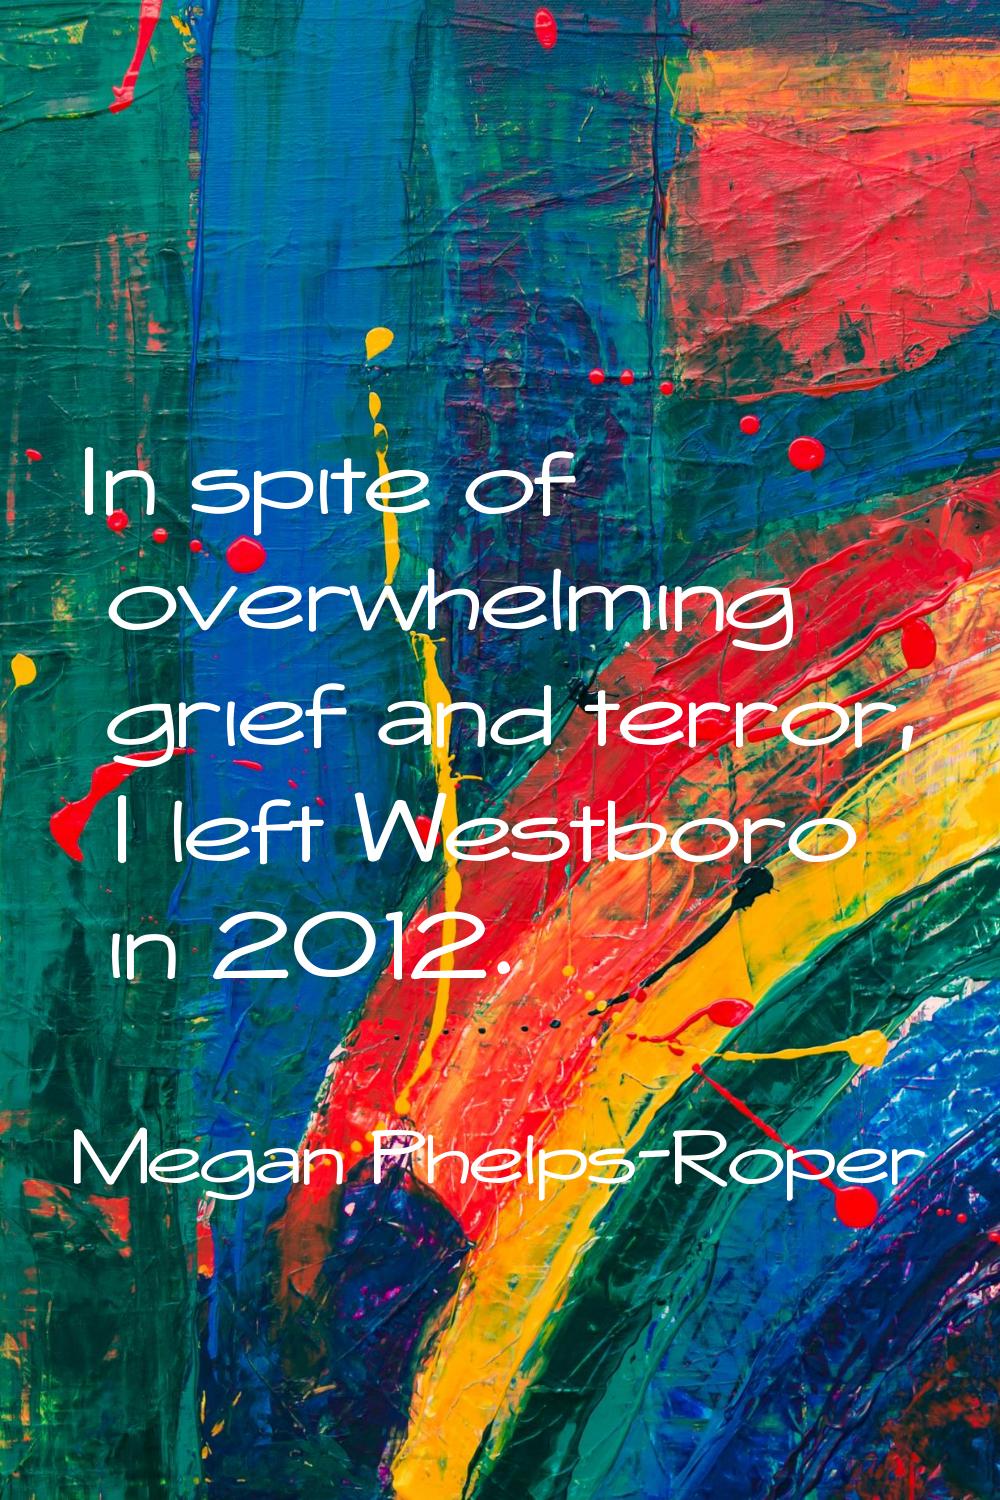 In spite of overwhelming grief and terror, I left Westboro in 2012.